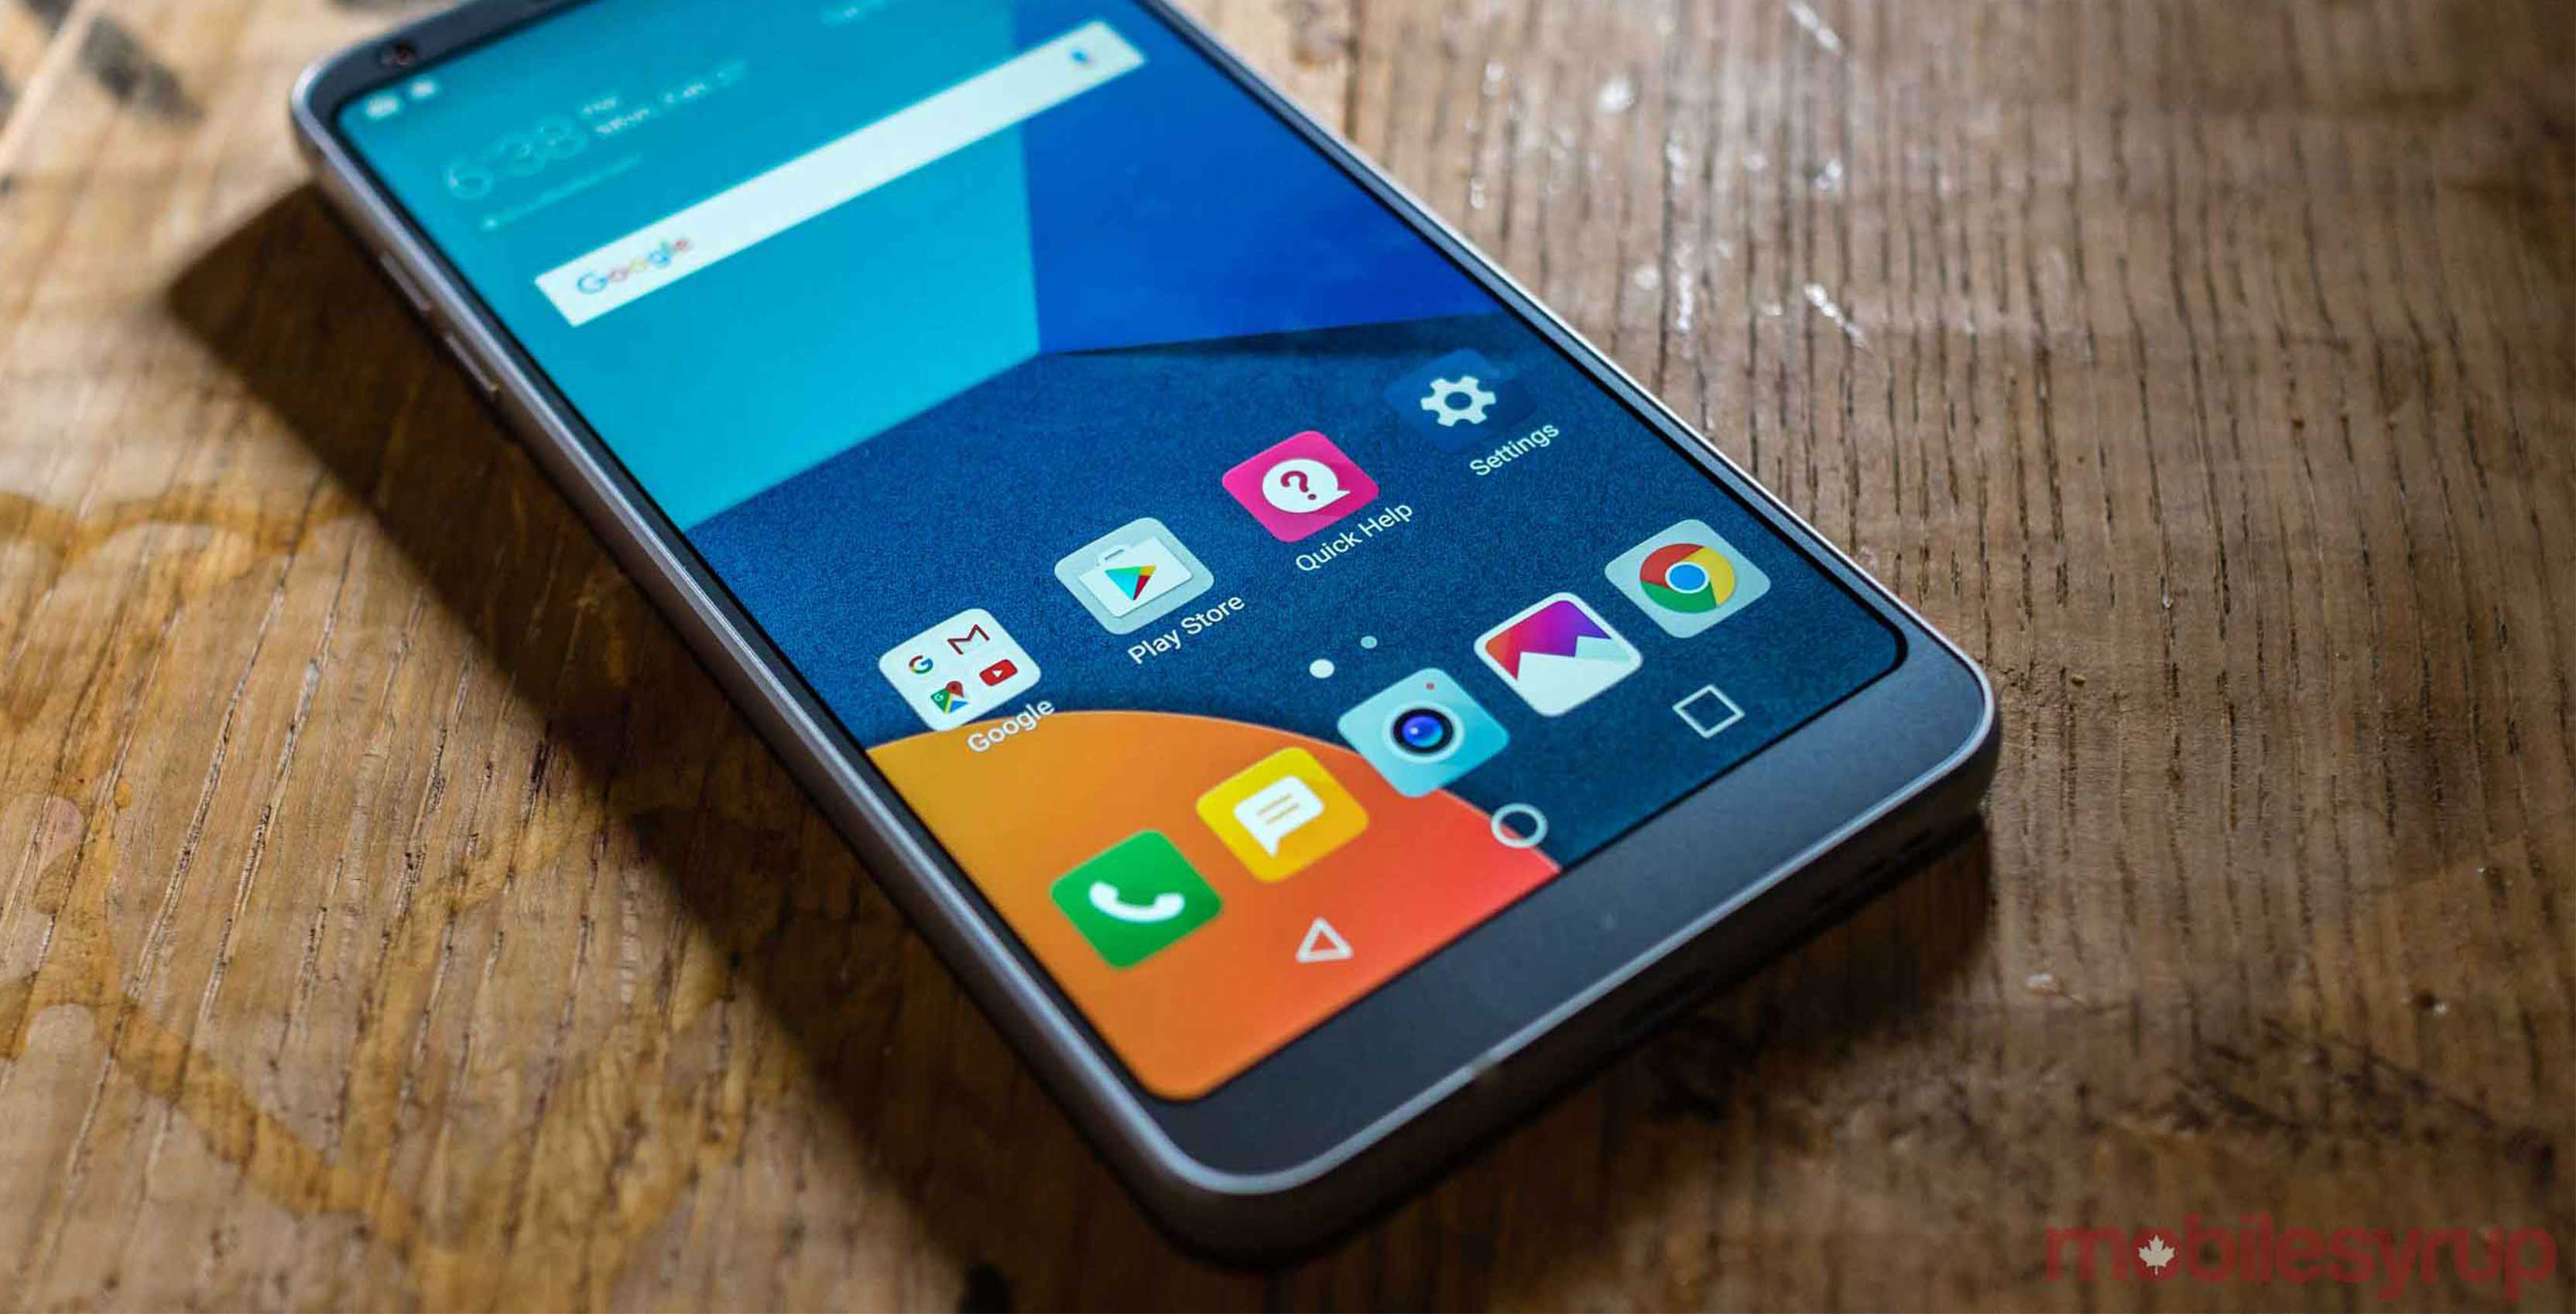 lg g6 on table